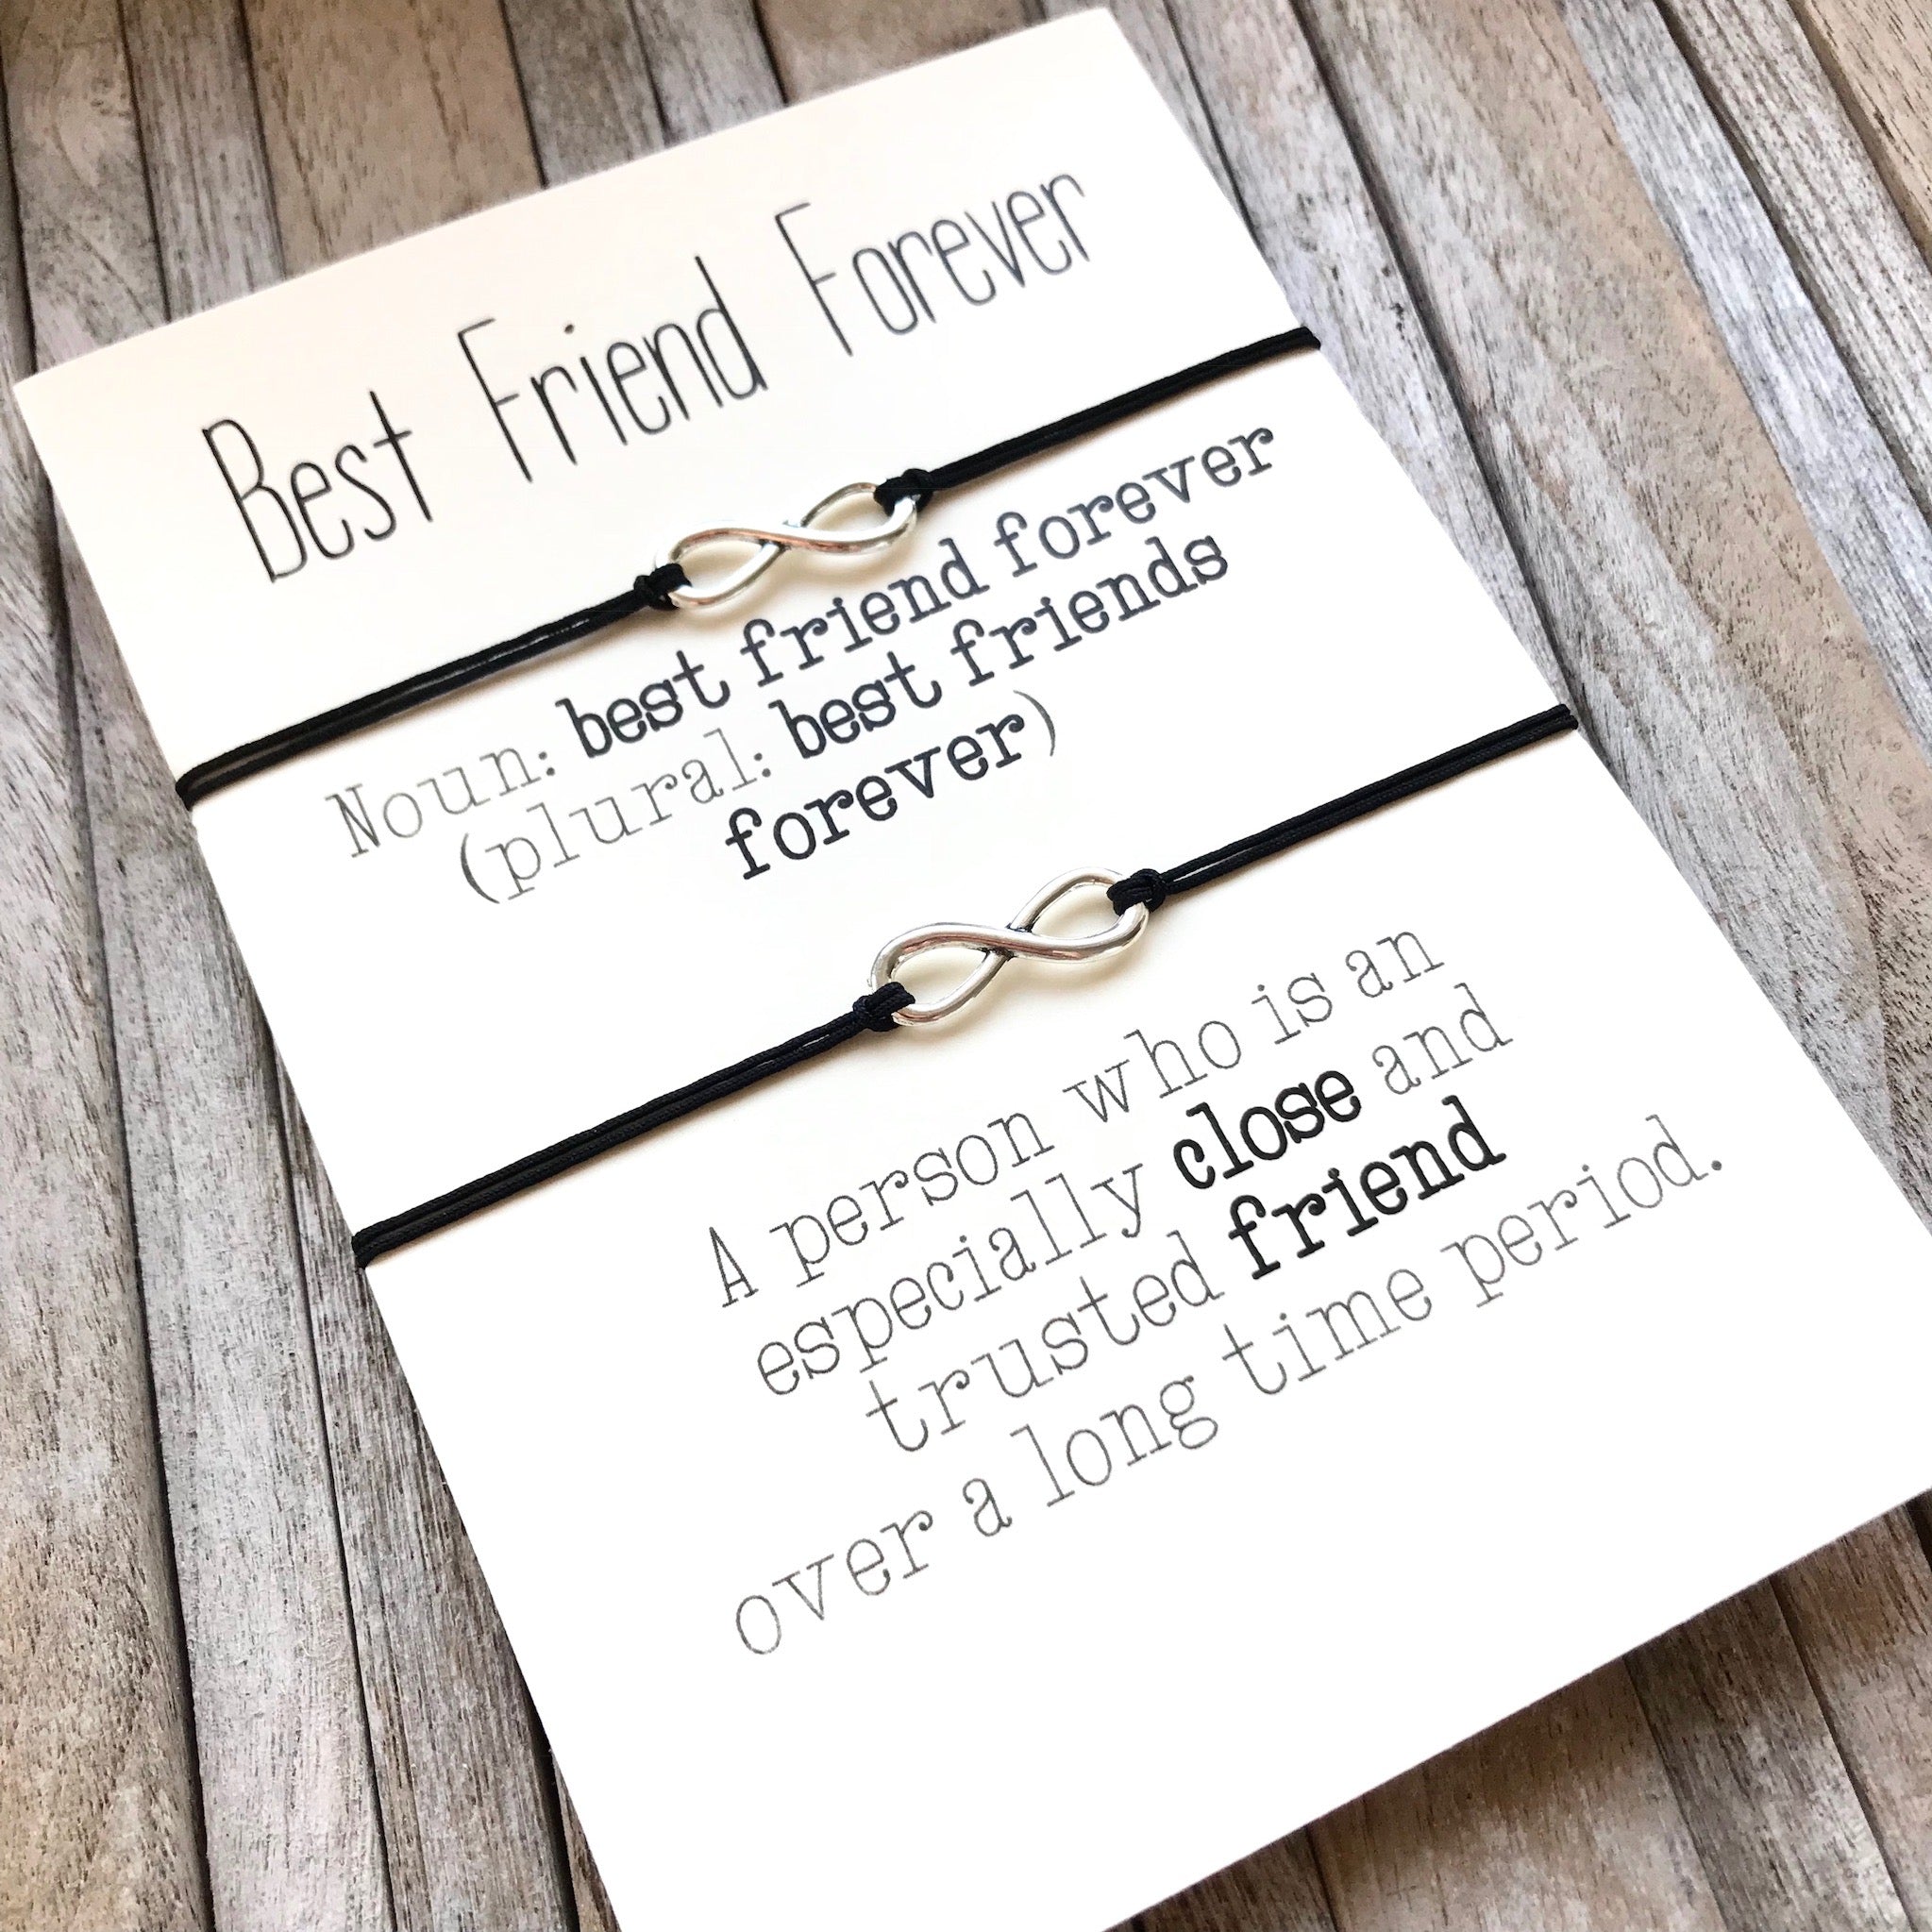 Matching best friends bracelets – Carrie Clover handcrafted gifts